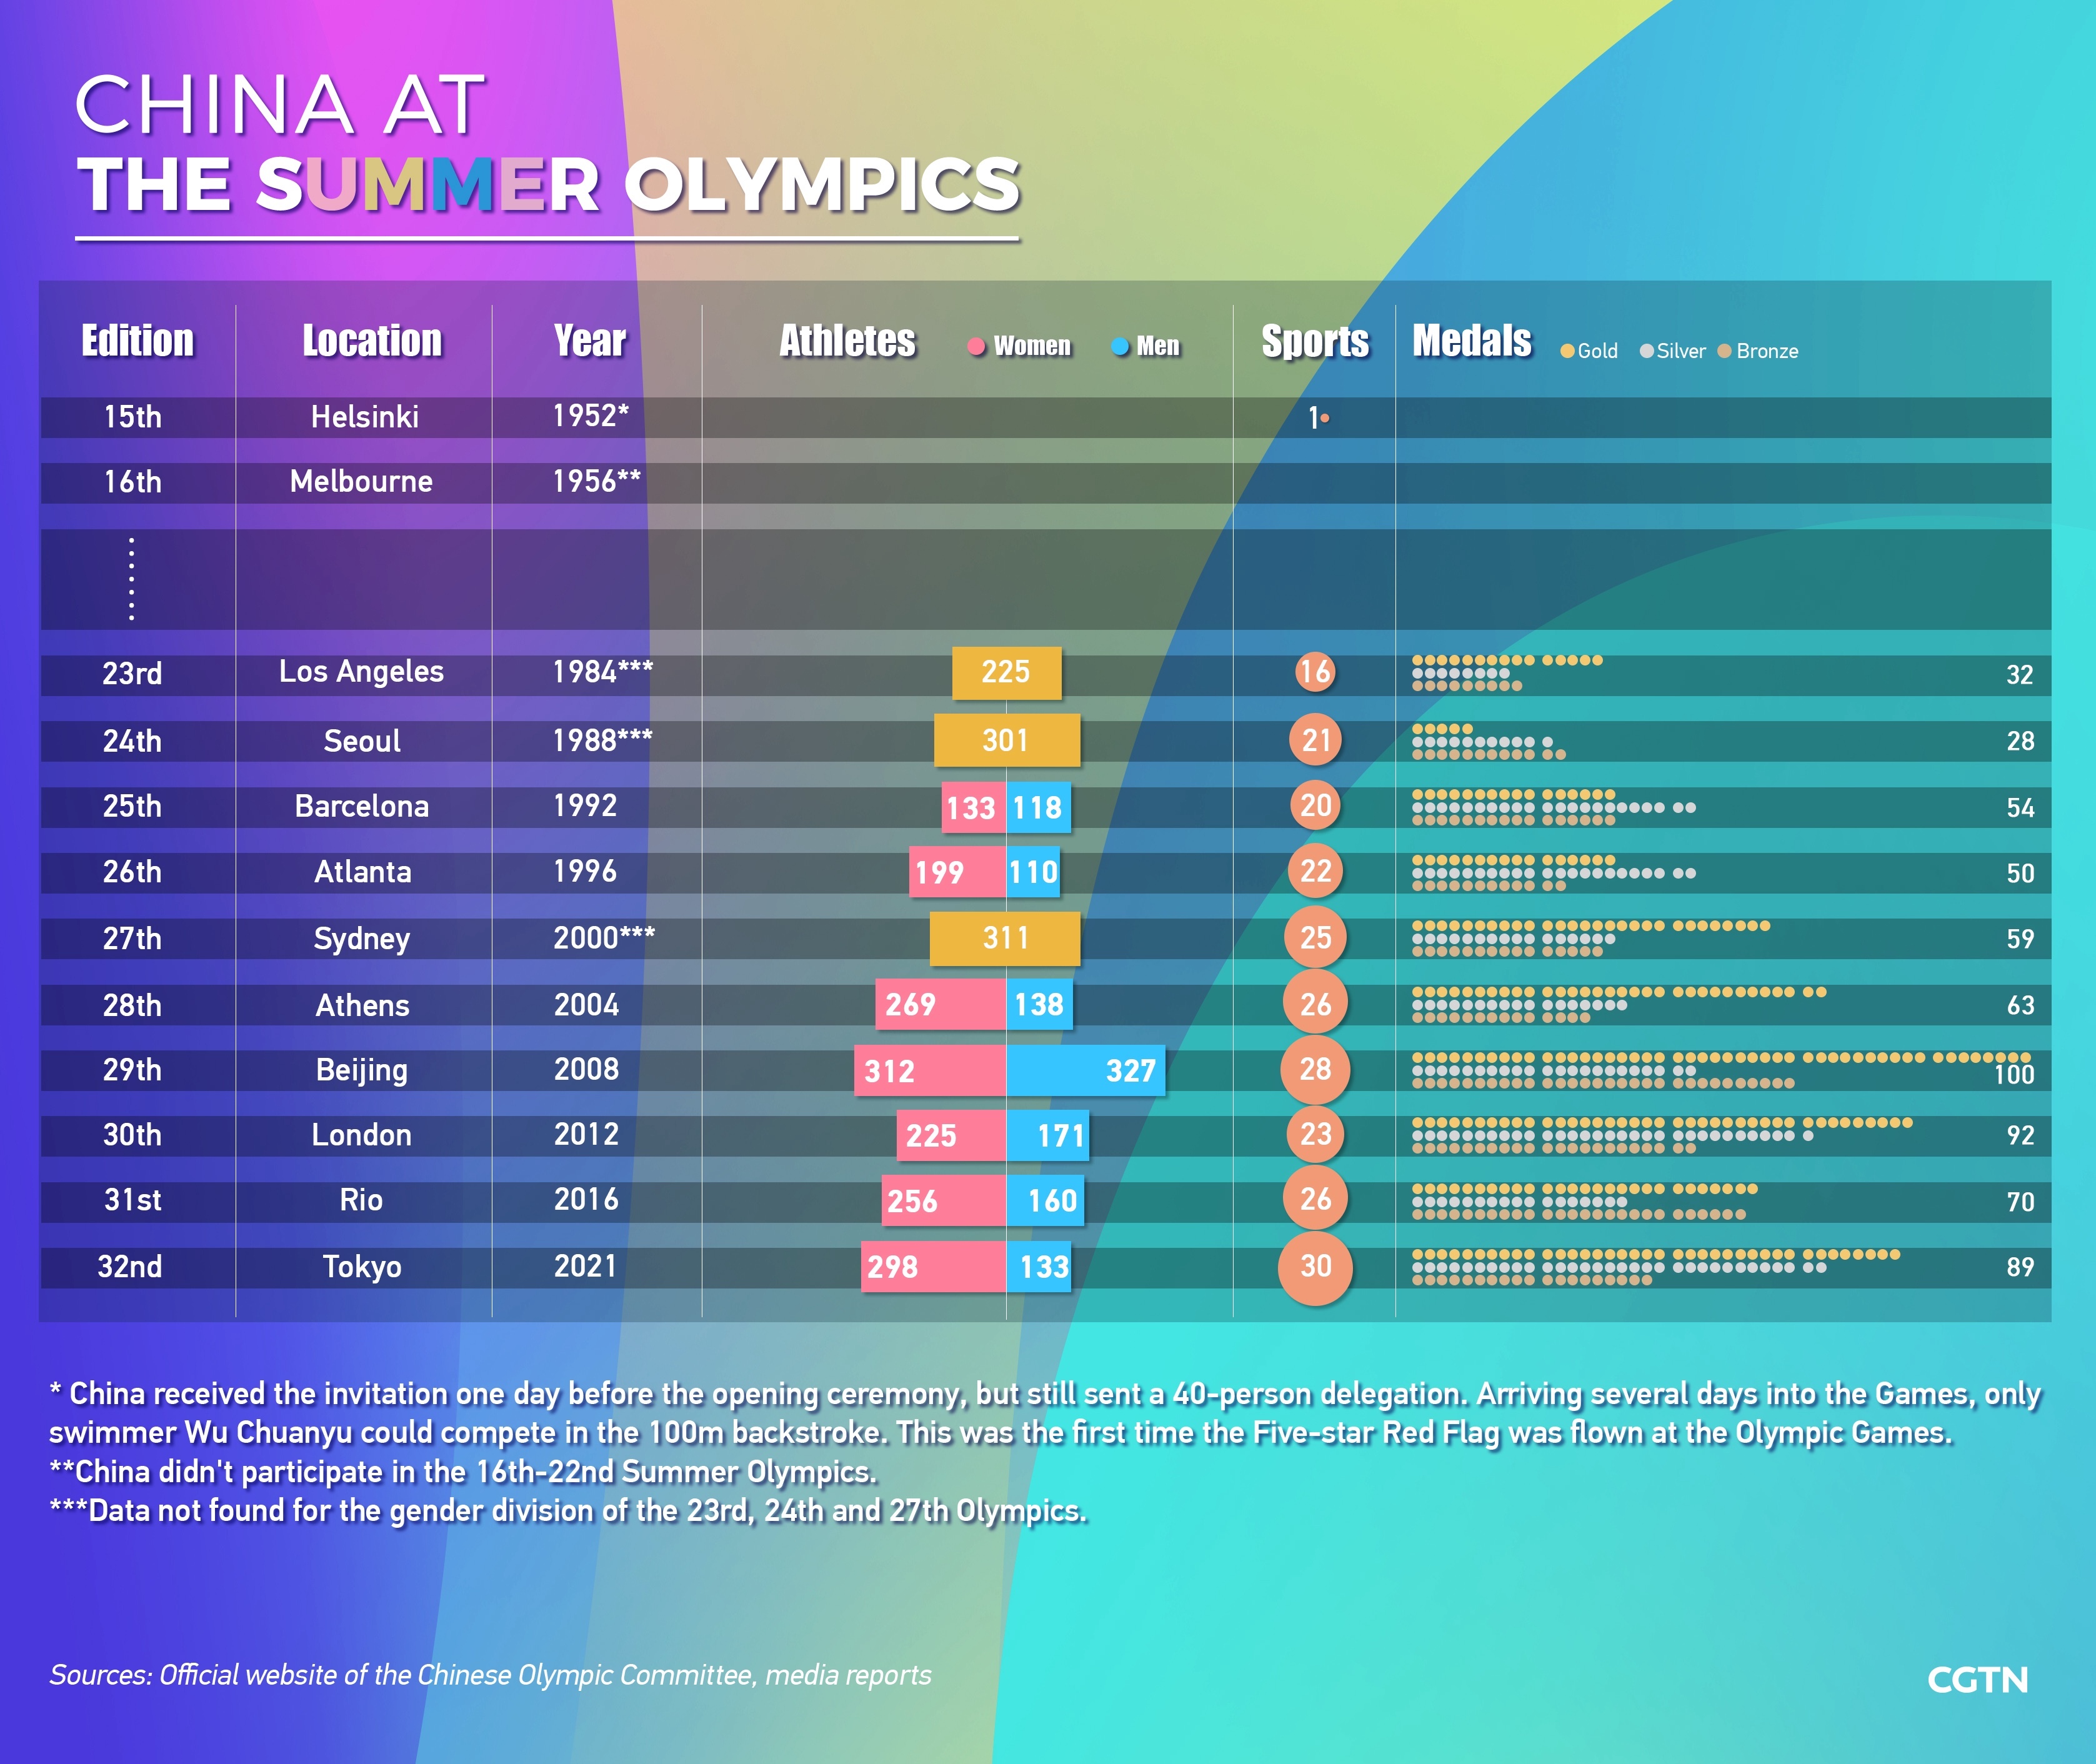 Olympic Day: China at the Summer Olympics